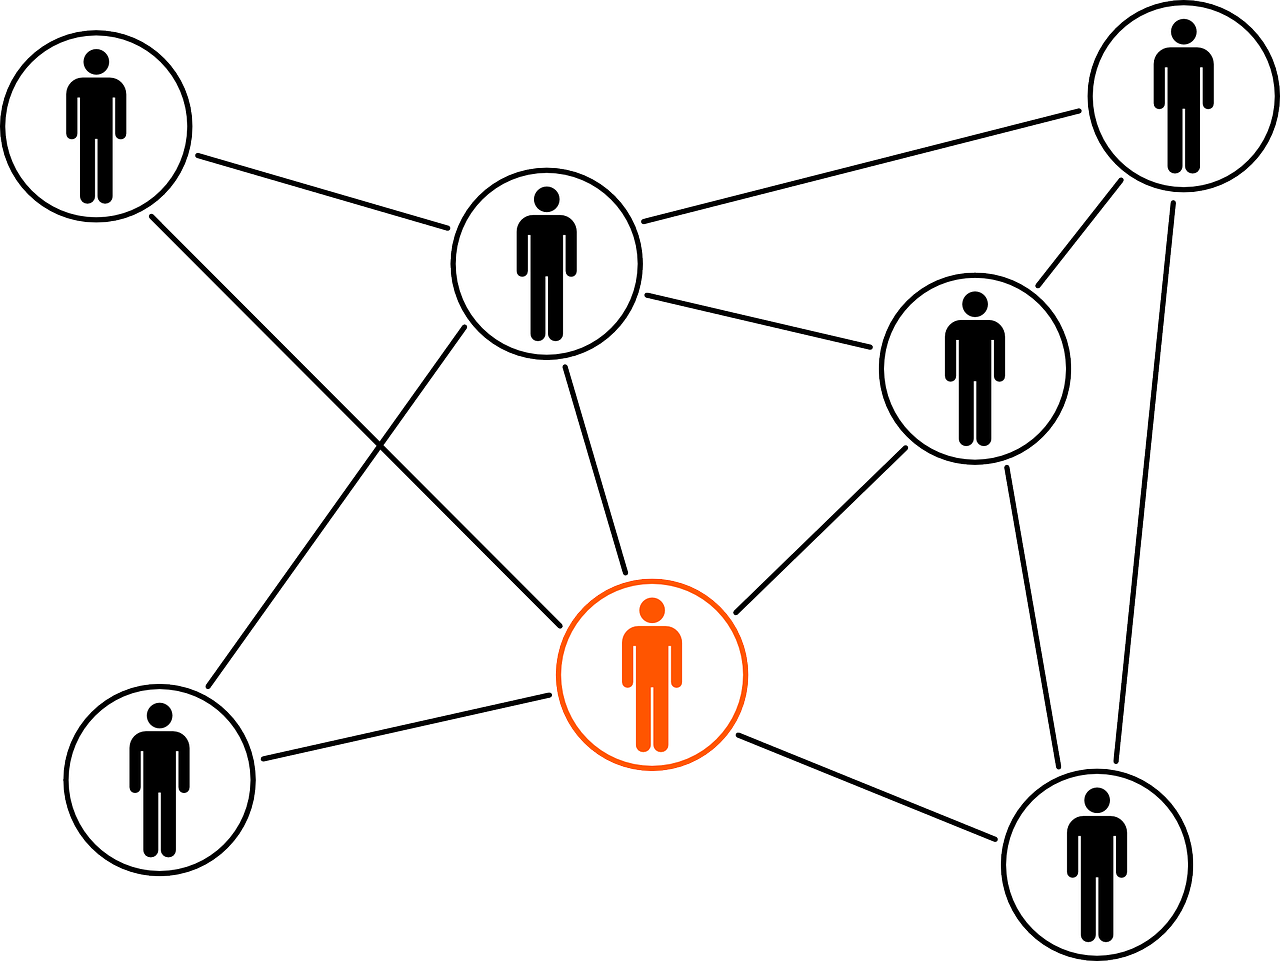 a network of people connected to each other, by Julian Allen, callouts, 1 male, simple stylized, high - contrast